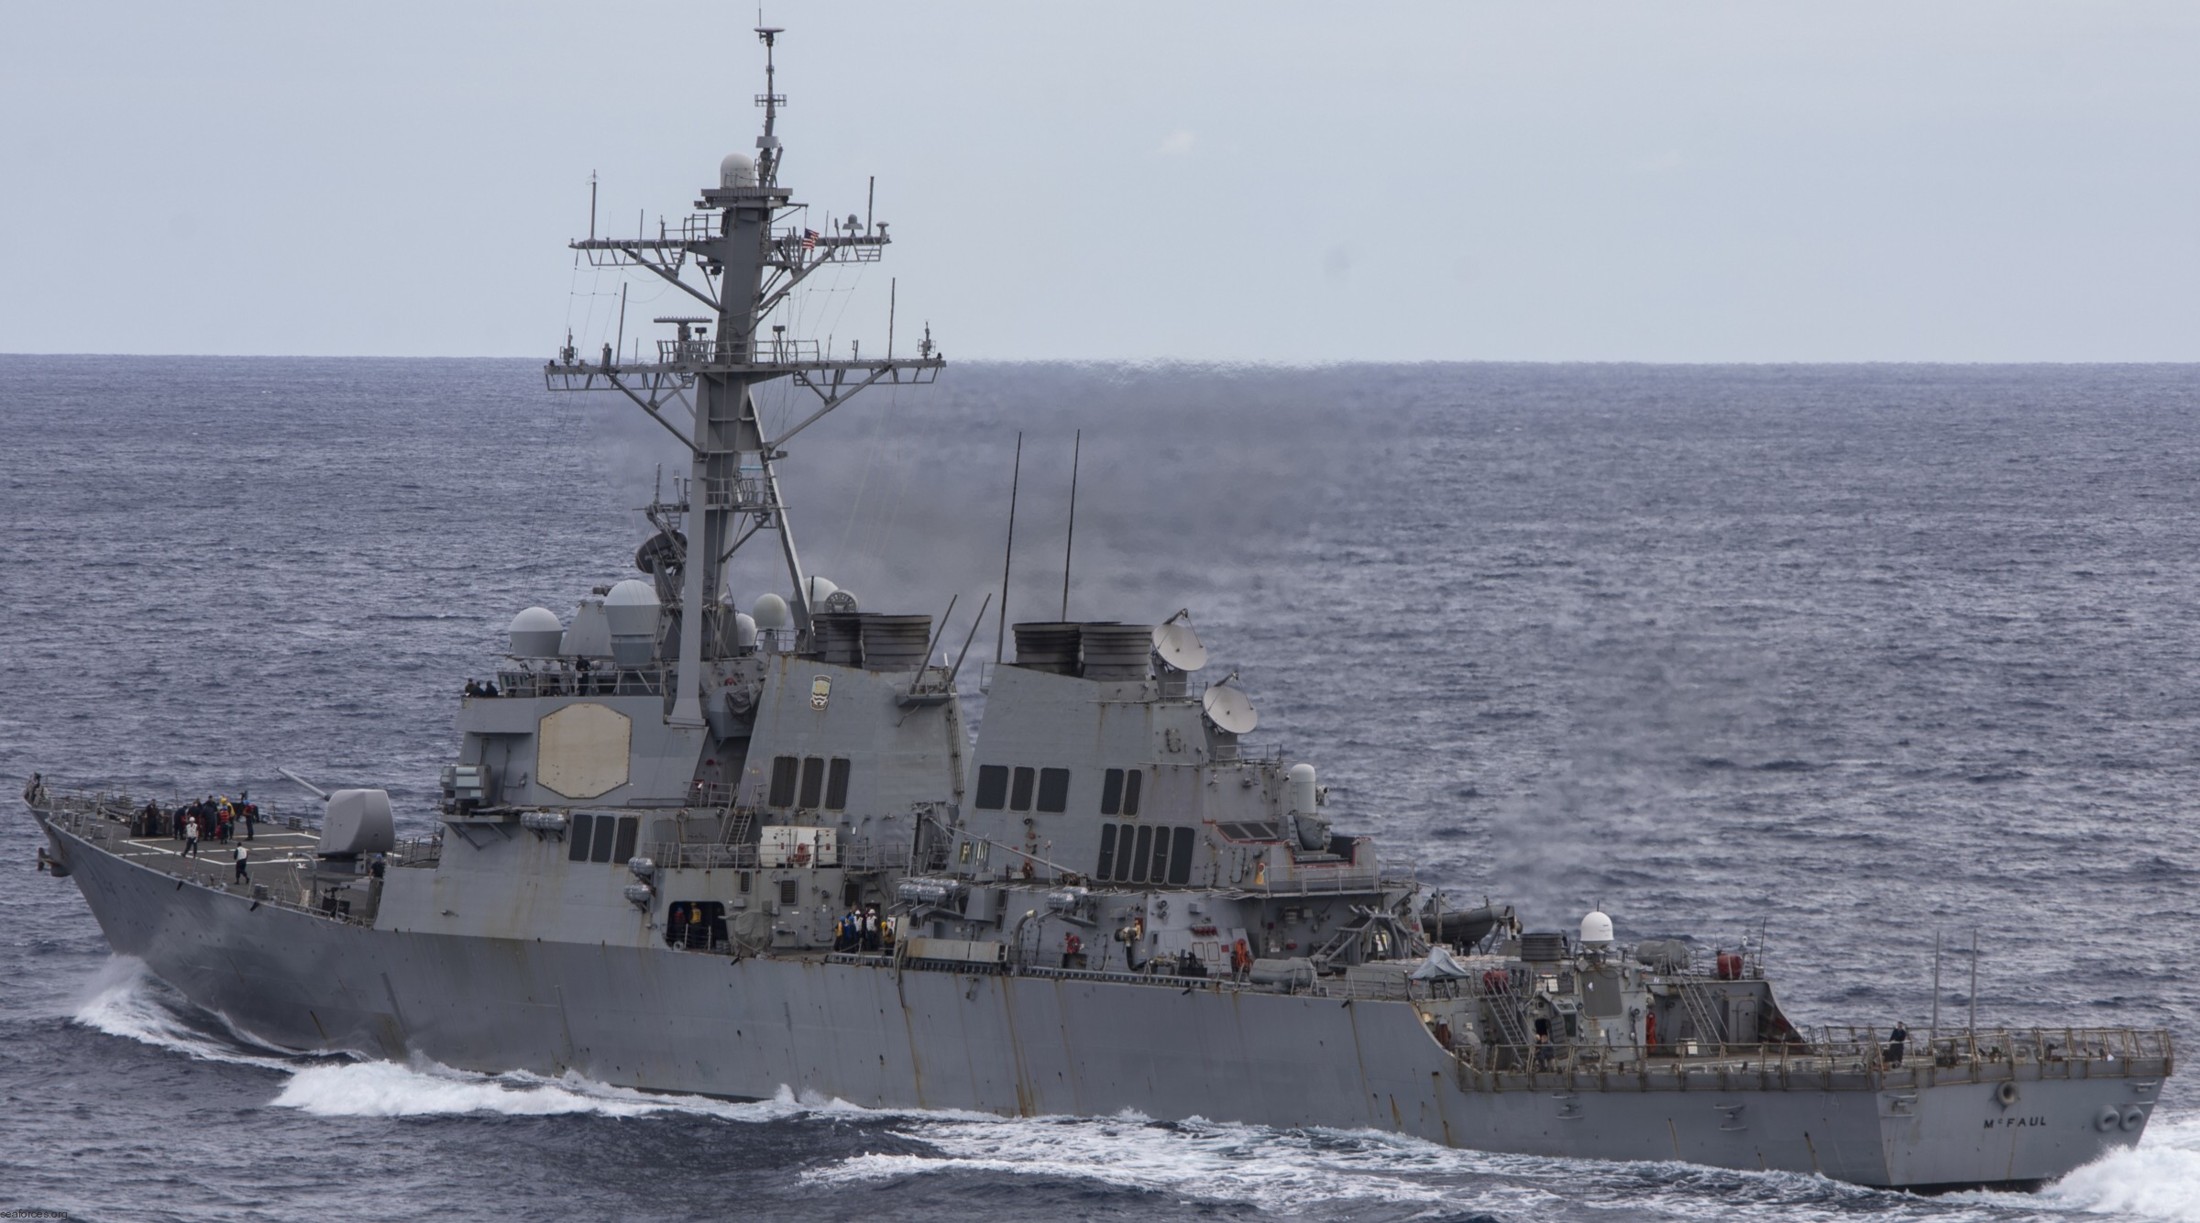 ddg-74 uss mcfaul guided missile destroyer arleigh burke class aegis bmd 20